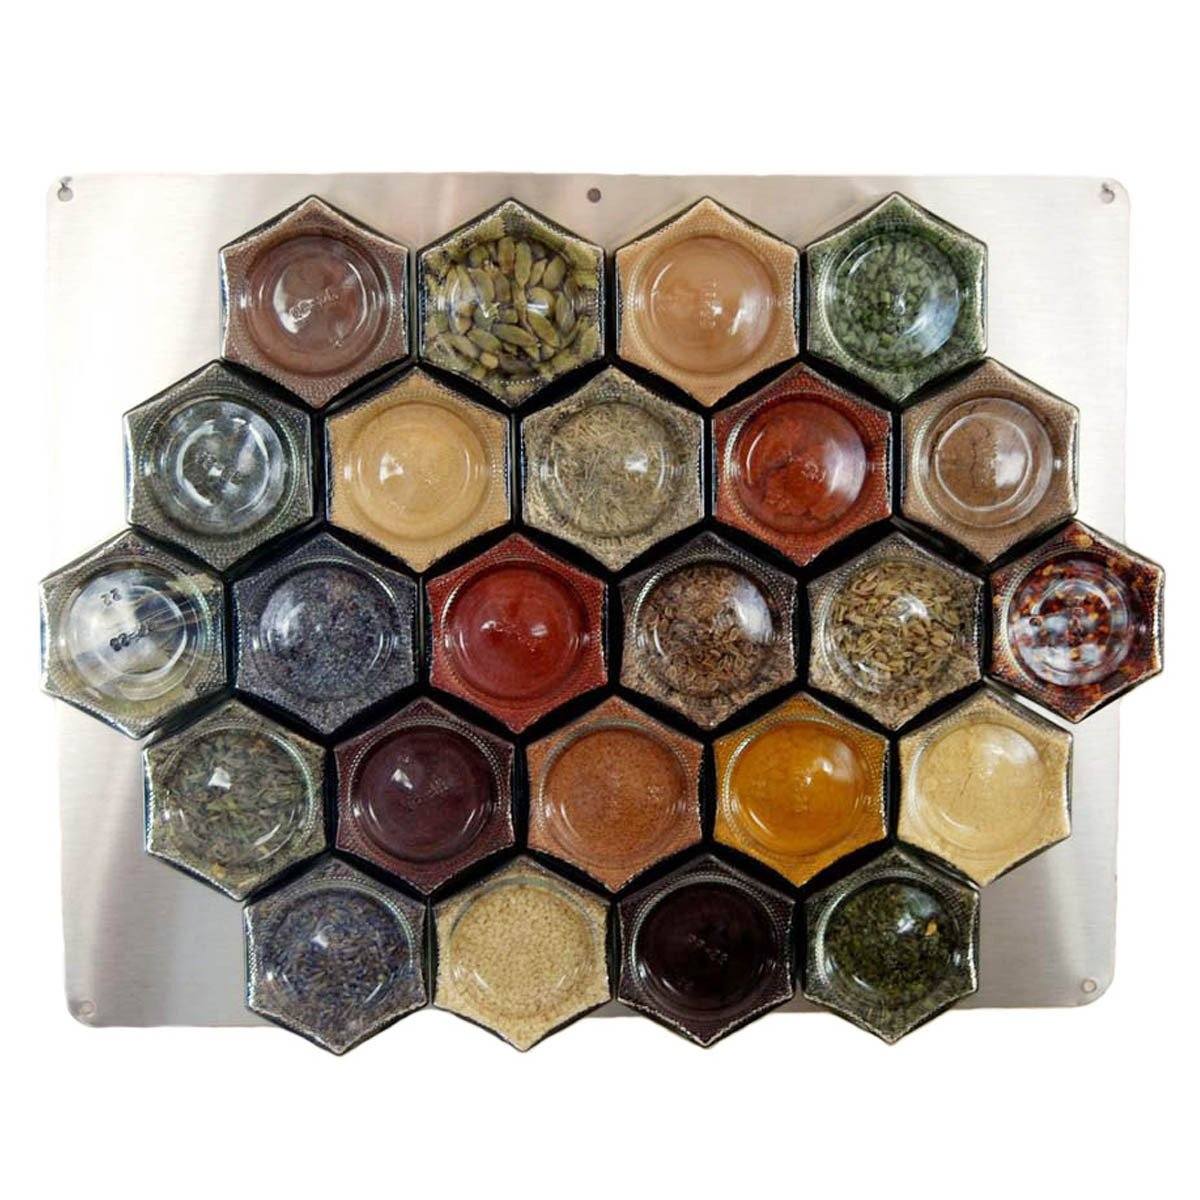 Gneiss Spice Large Empty Magnetic Spice Jars | Create A DIY Hanging Spice Rack on Your Fridge | Includes Hexagon Glass Jars Magnetic Lids + Spice